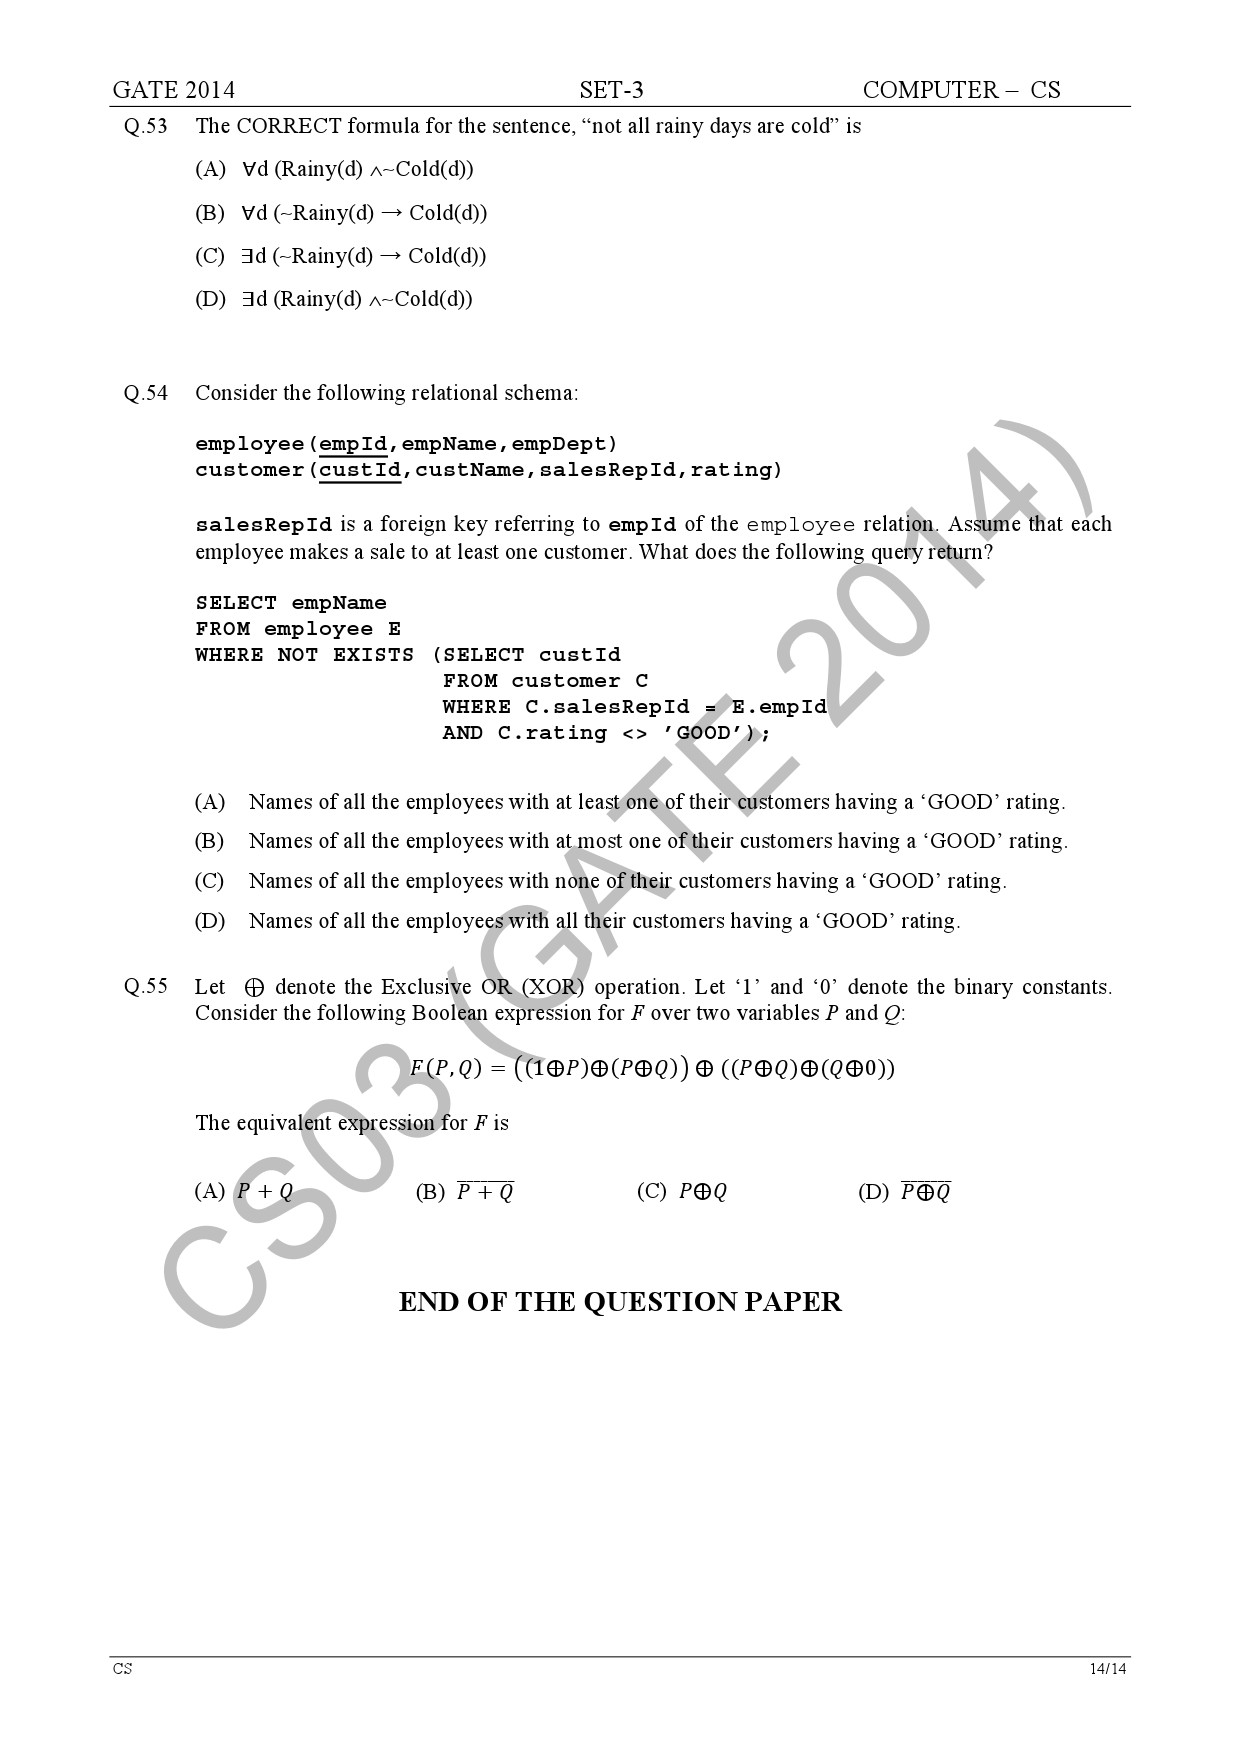 GATE Exam Question Paper 2014 Computer Science and Information Technology Set 3 20